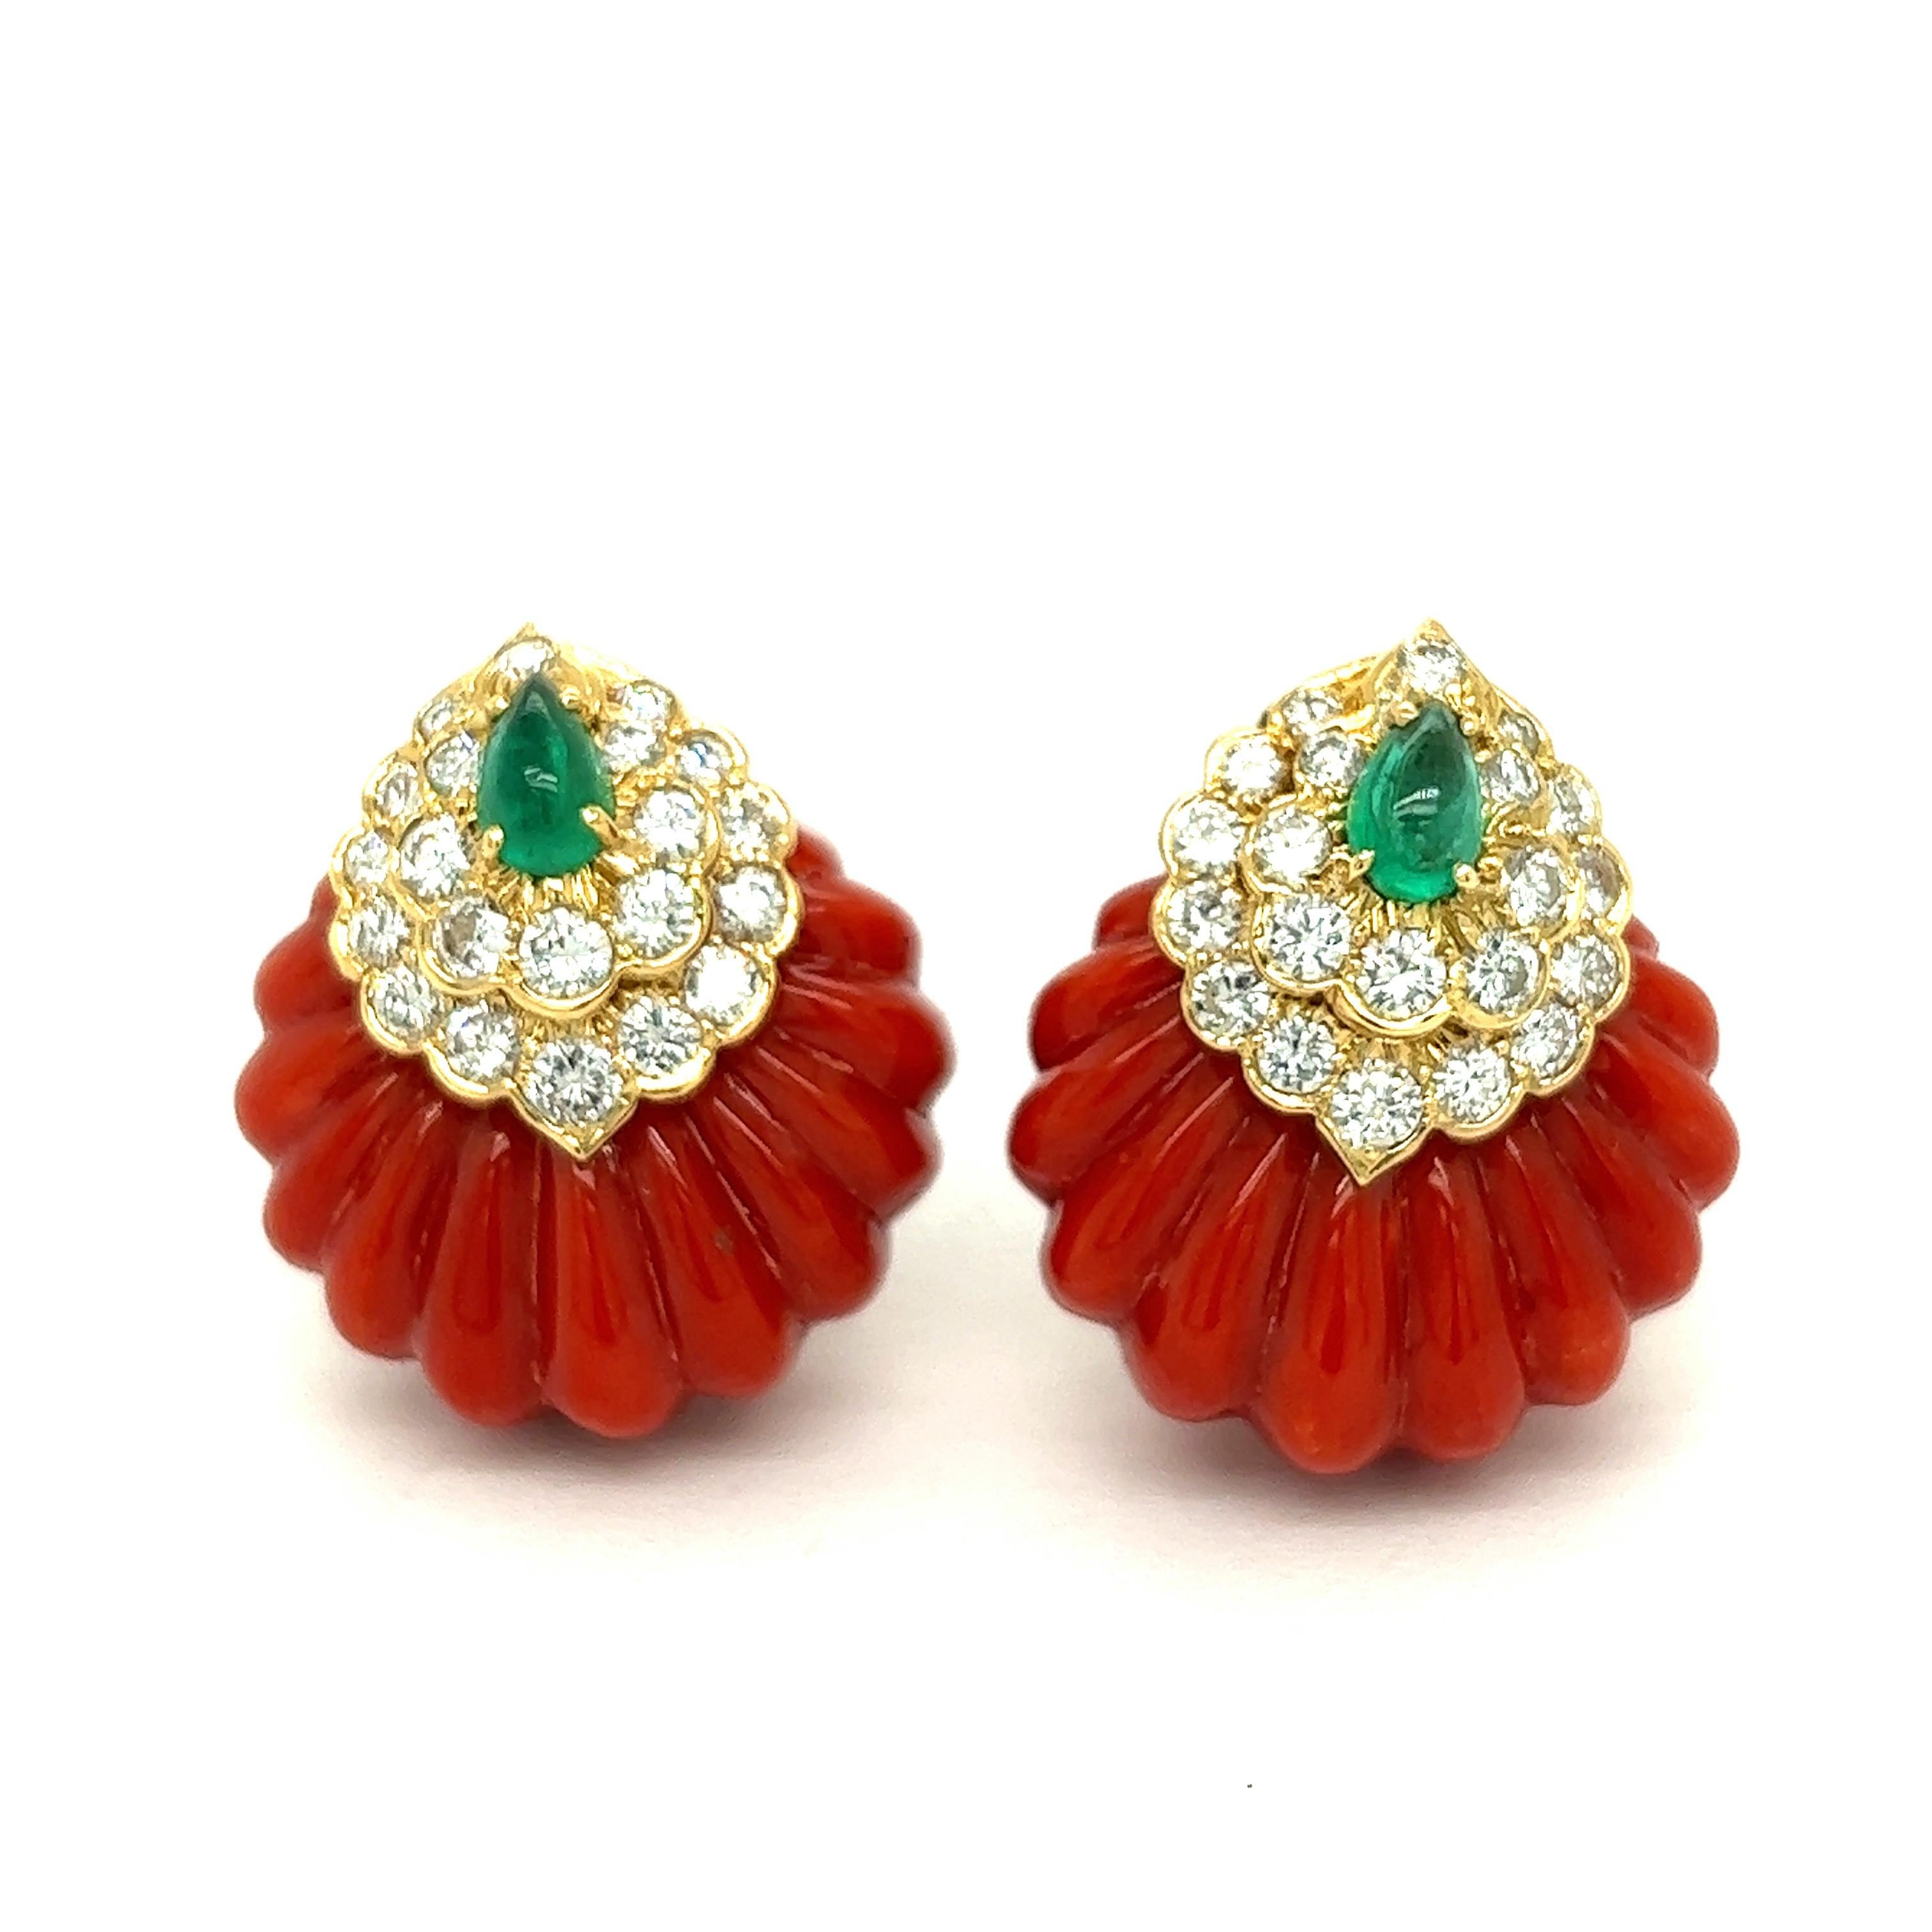 David Webb Coral Diamond Emerald Ear Clips

Round brilliant-cut diamonds of approximately 3.80 carats total, pear-shape cabochon emeralds, and carved coral; set on 18 karat yellow gold; marked David Webb, 18k

Size: width 2.3 cm, length 2.6 cm
Total